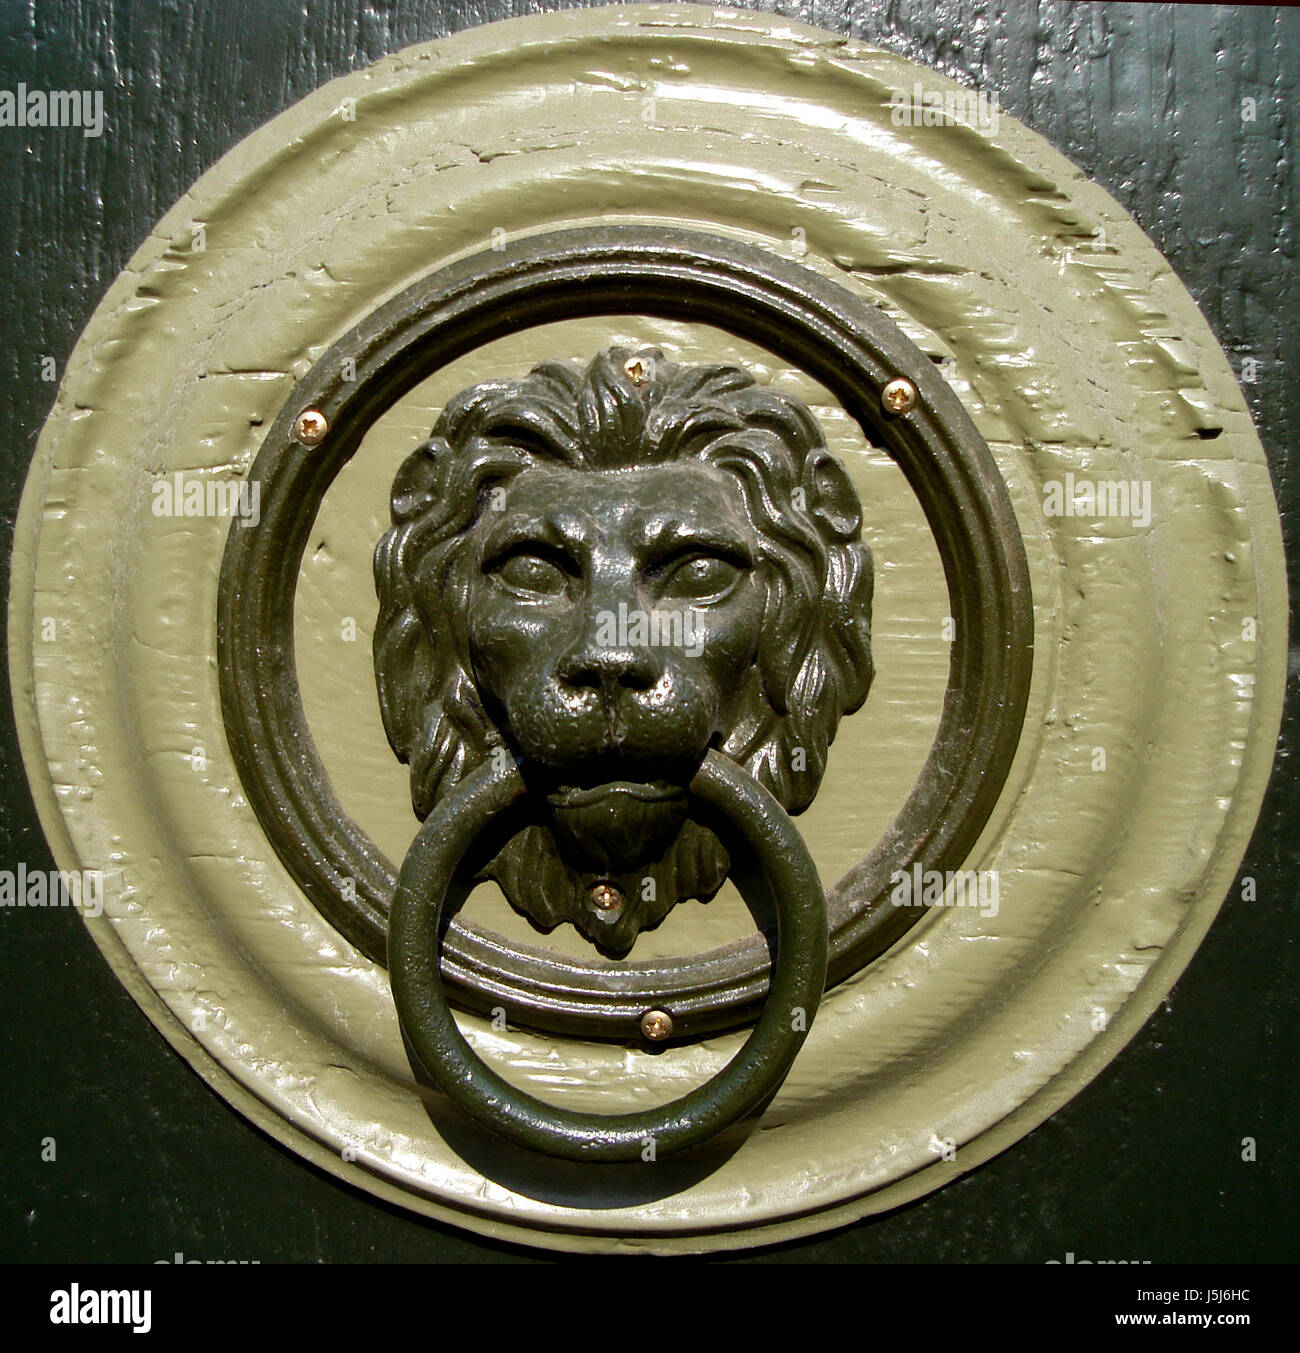 metal handle in the form of a lion's head with a ring on the forged gate  close-up Stock Photo - Alamy